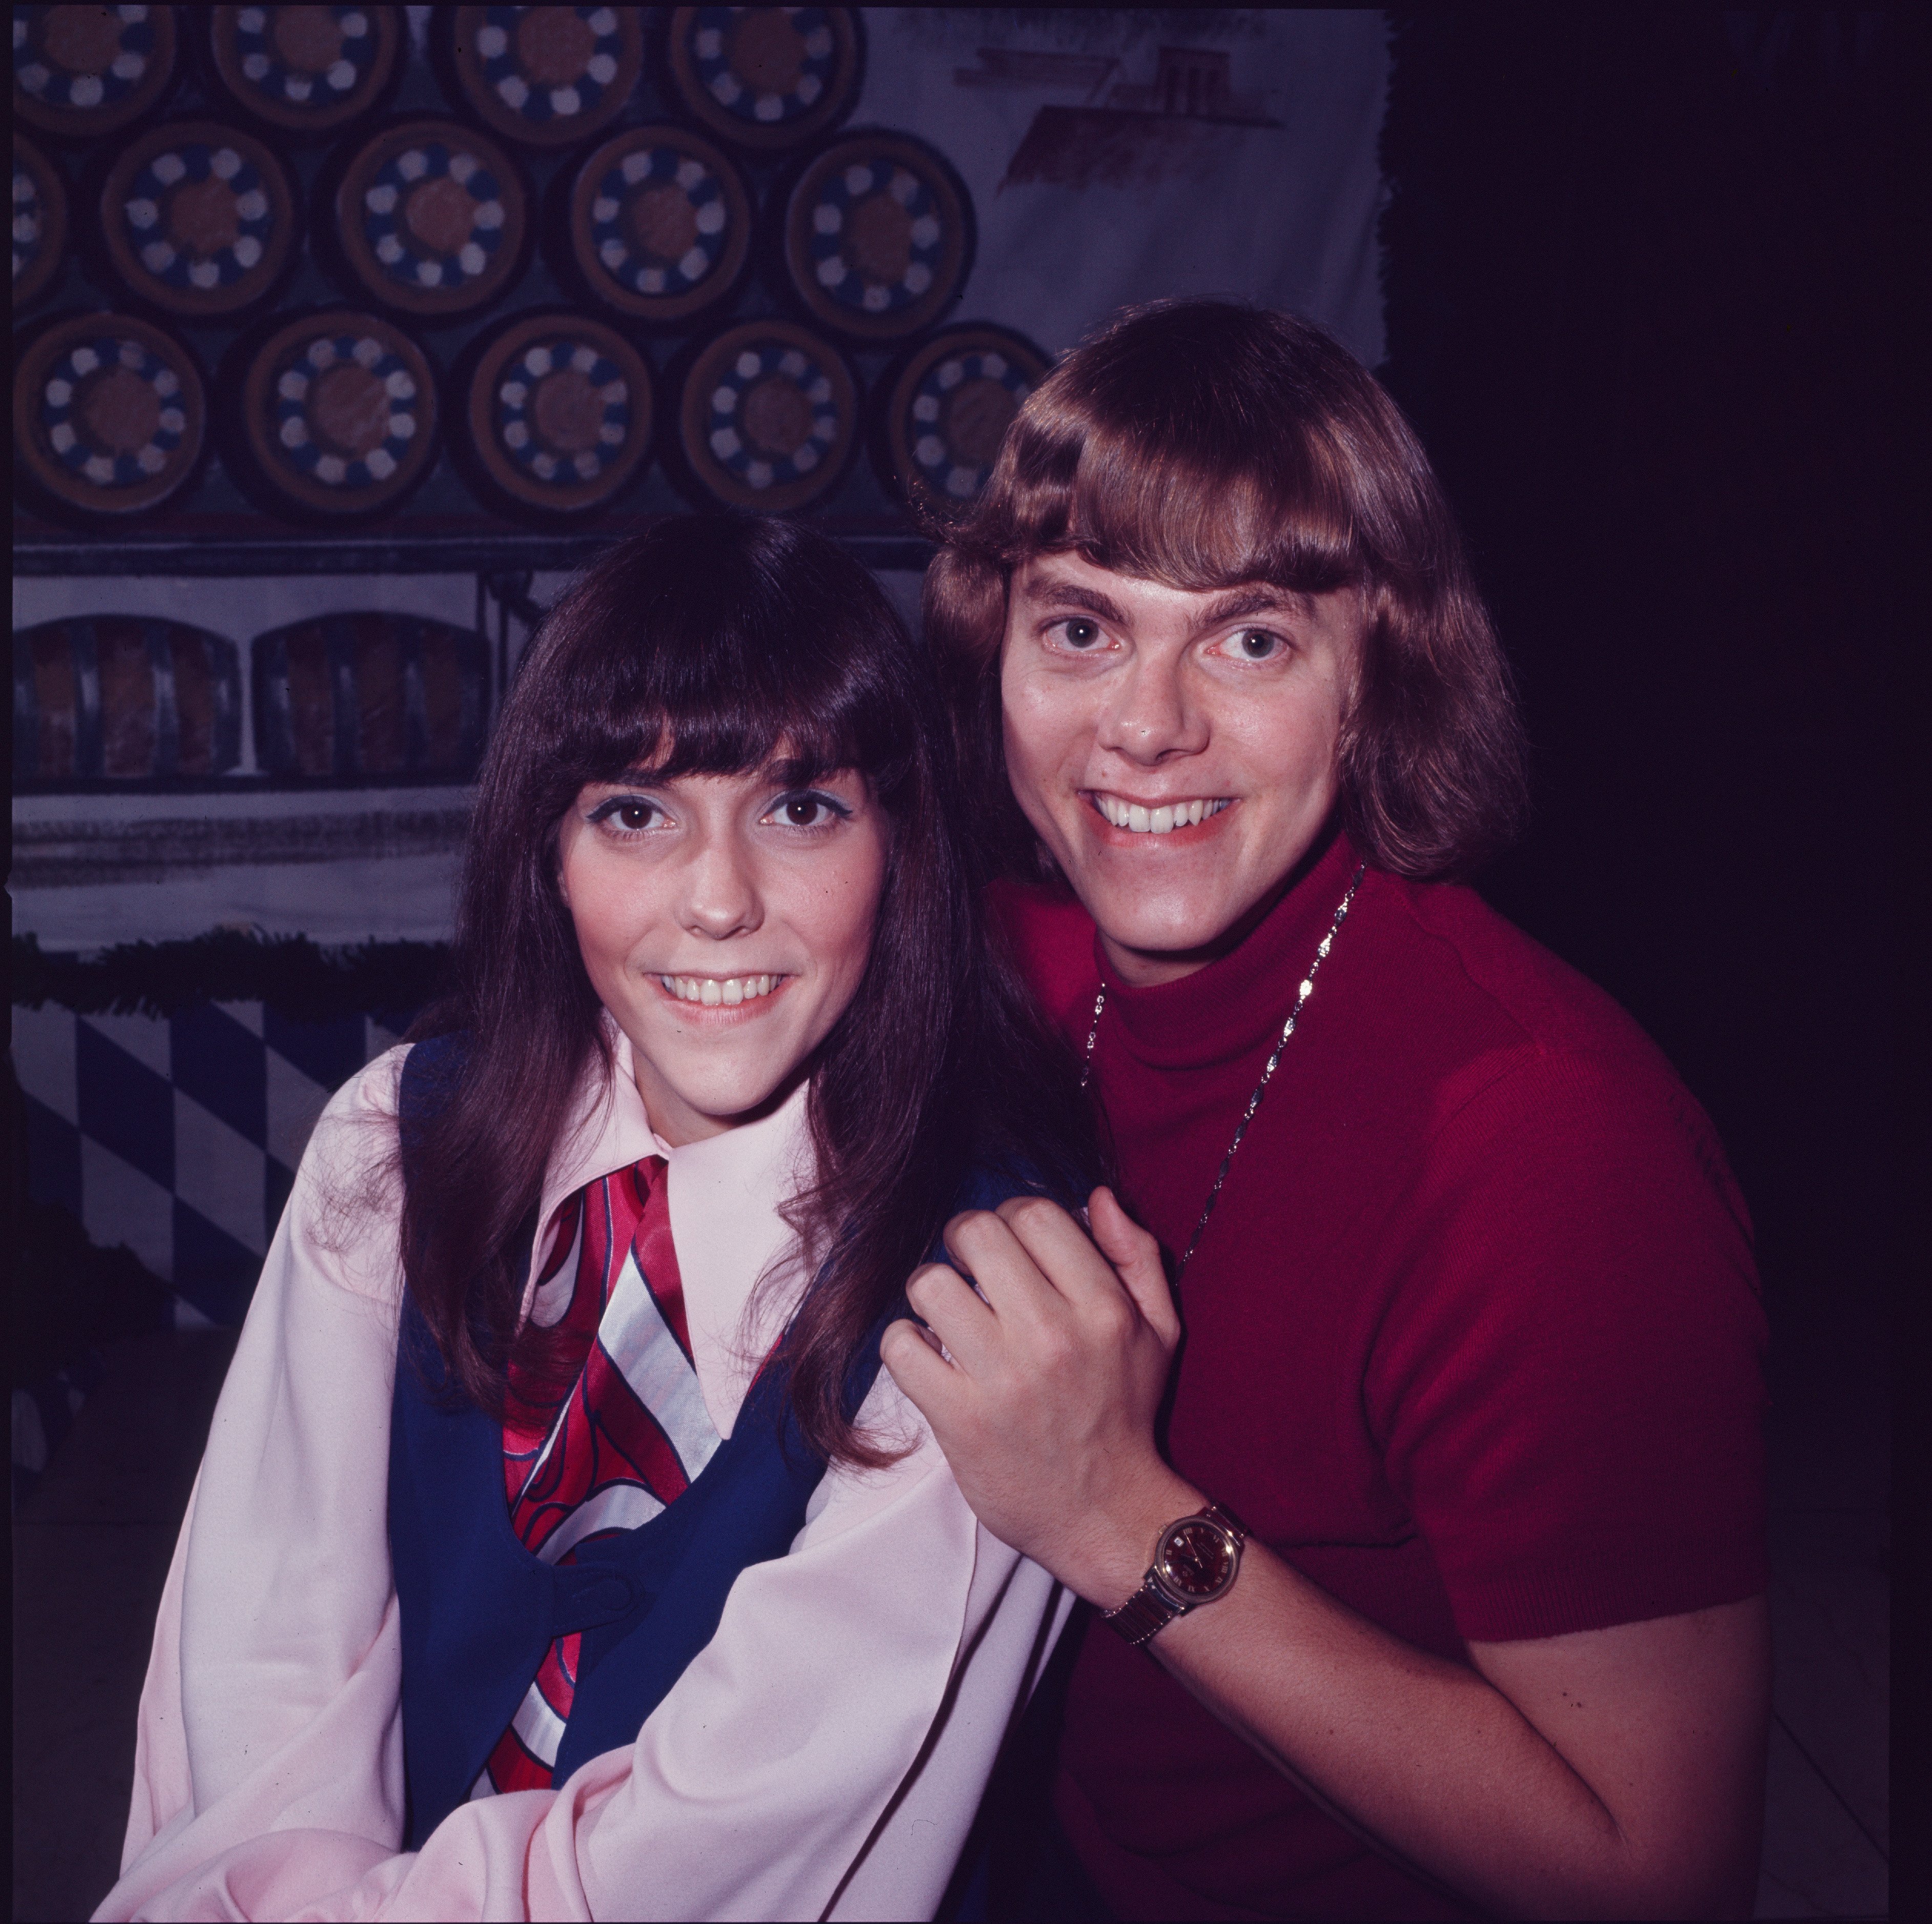 Karen Carpenter (left) and Richard Carpenter (right) of The Carpenters, photo session in Tokyo, Japan, 2nd June 1972 | Source: Getty Images 